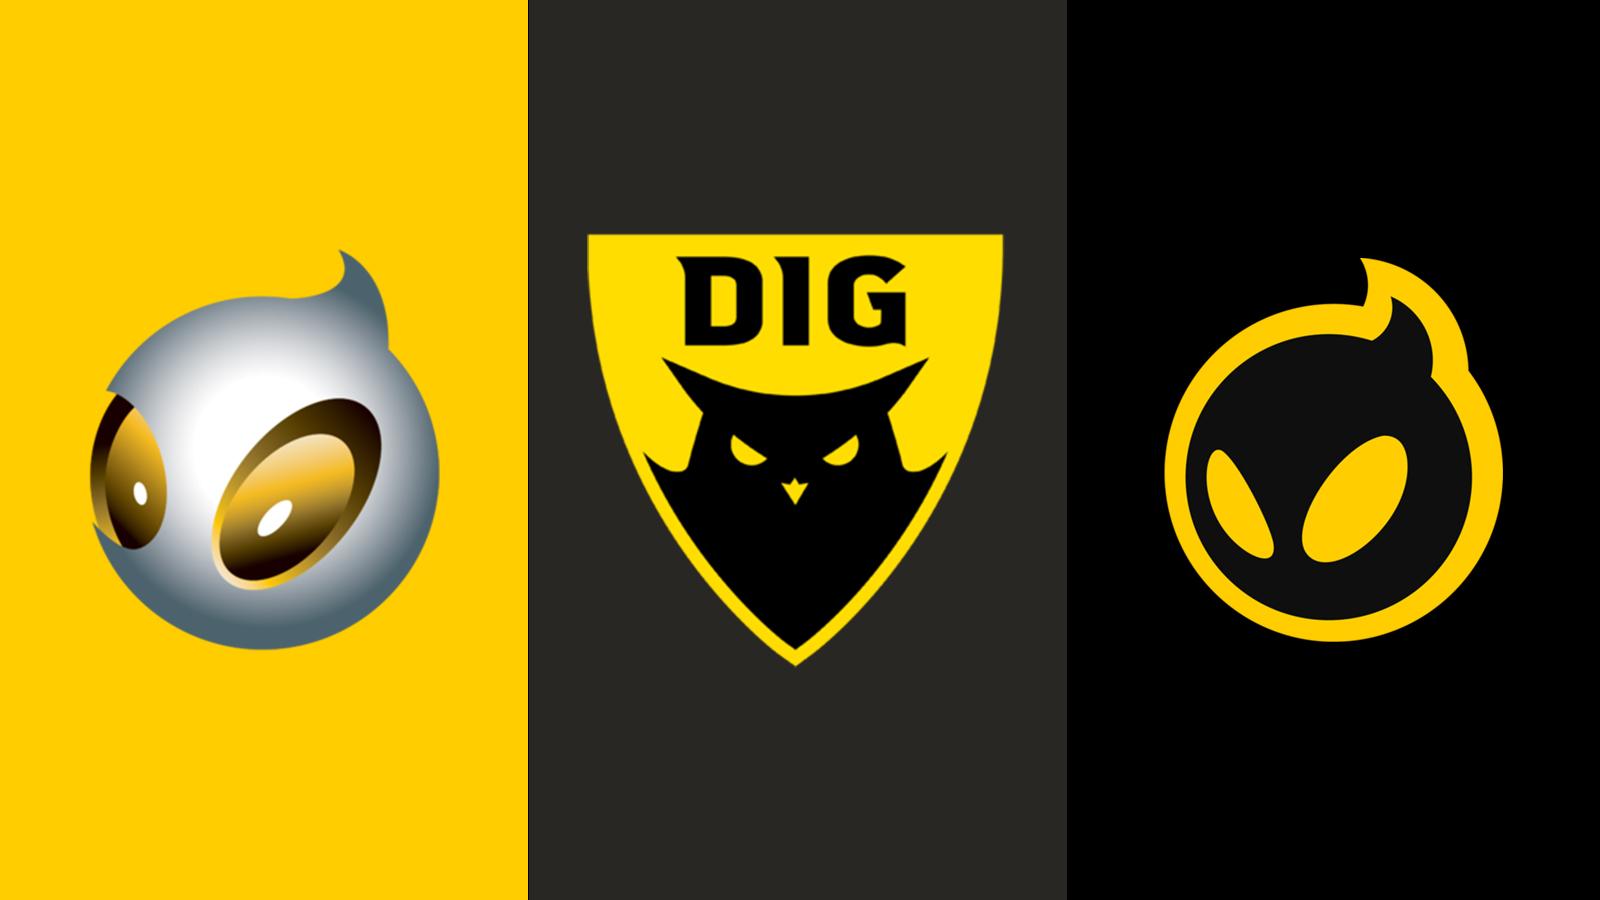 Champion Athleticwear excited to refresh Team Dignitas brand and